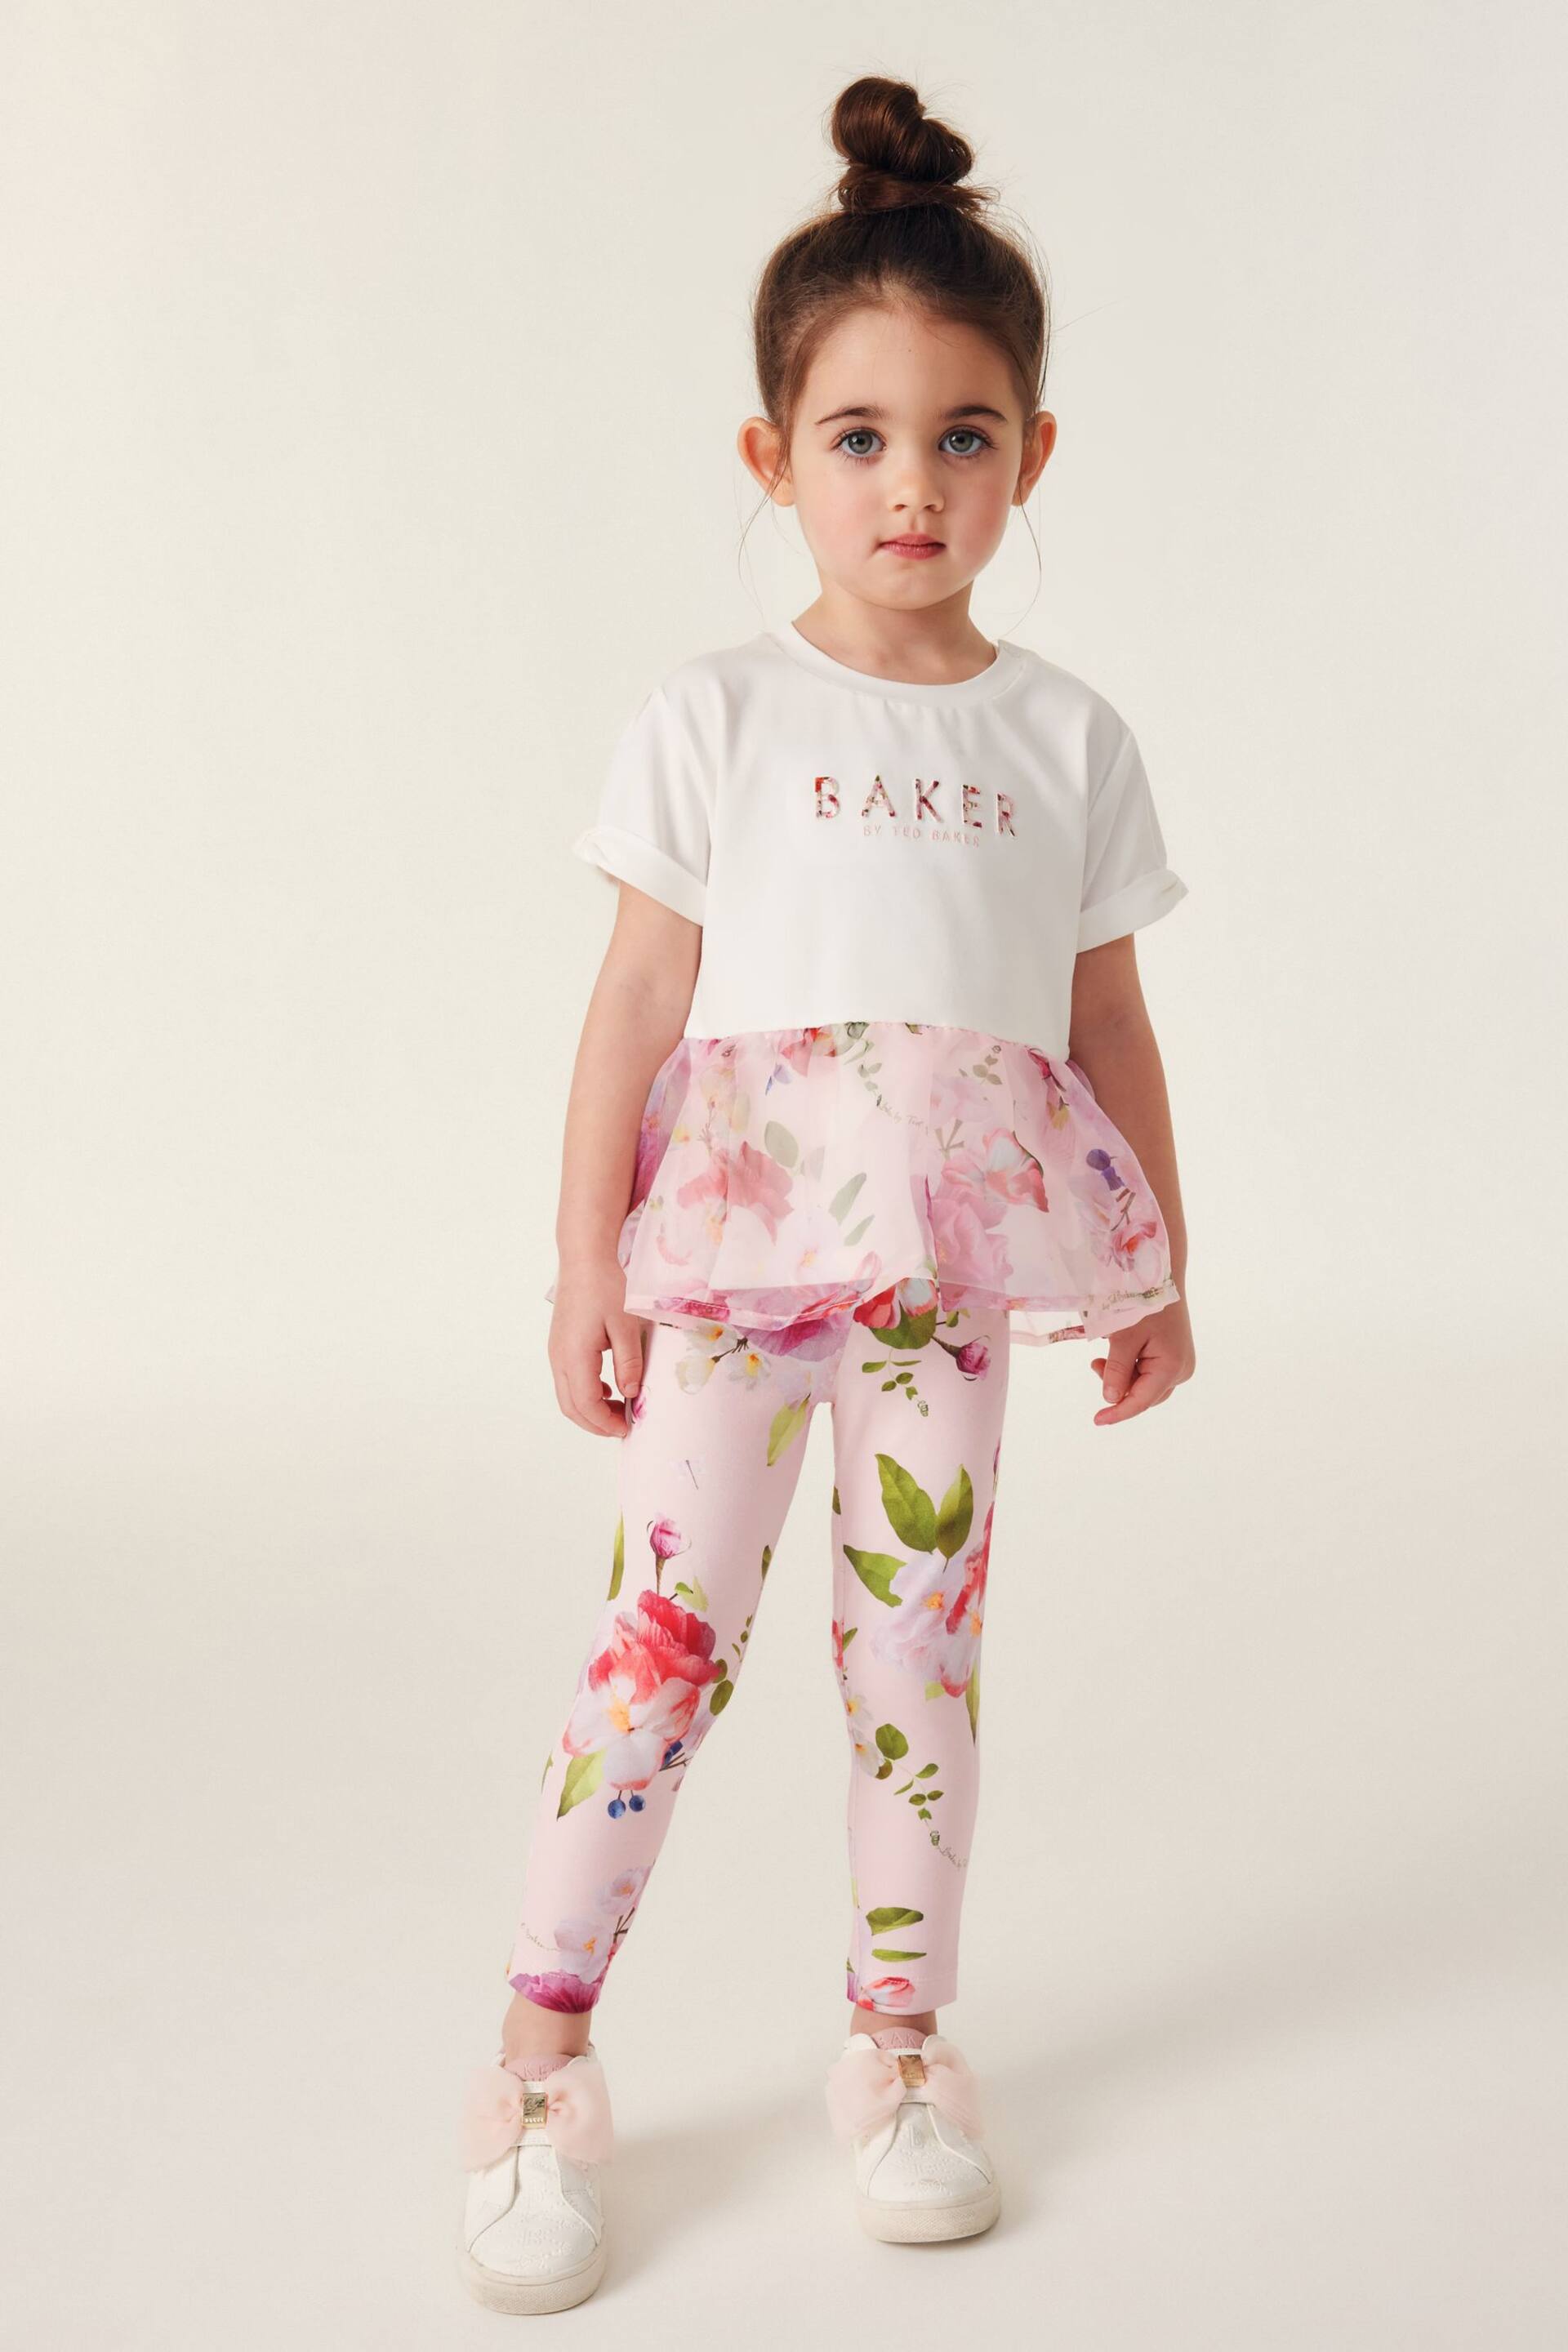 Baker by Ted Baker Organza Peplum T-Shirt and Legging Set - Image 1 of 12